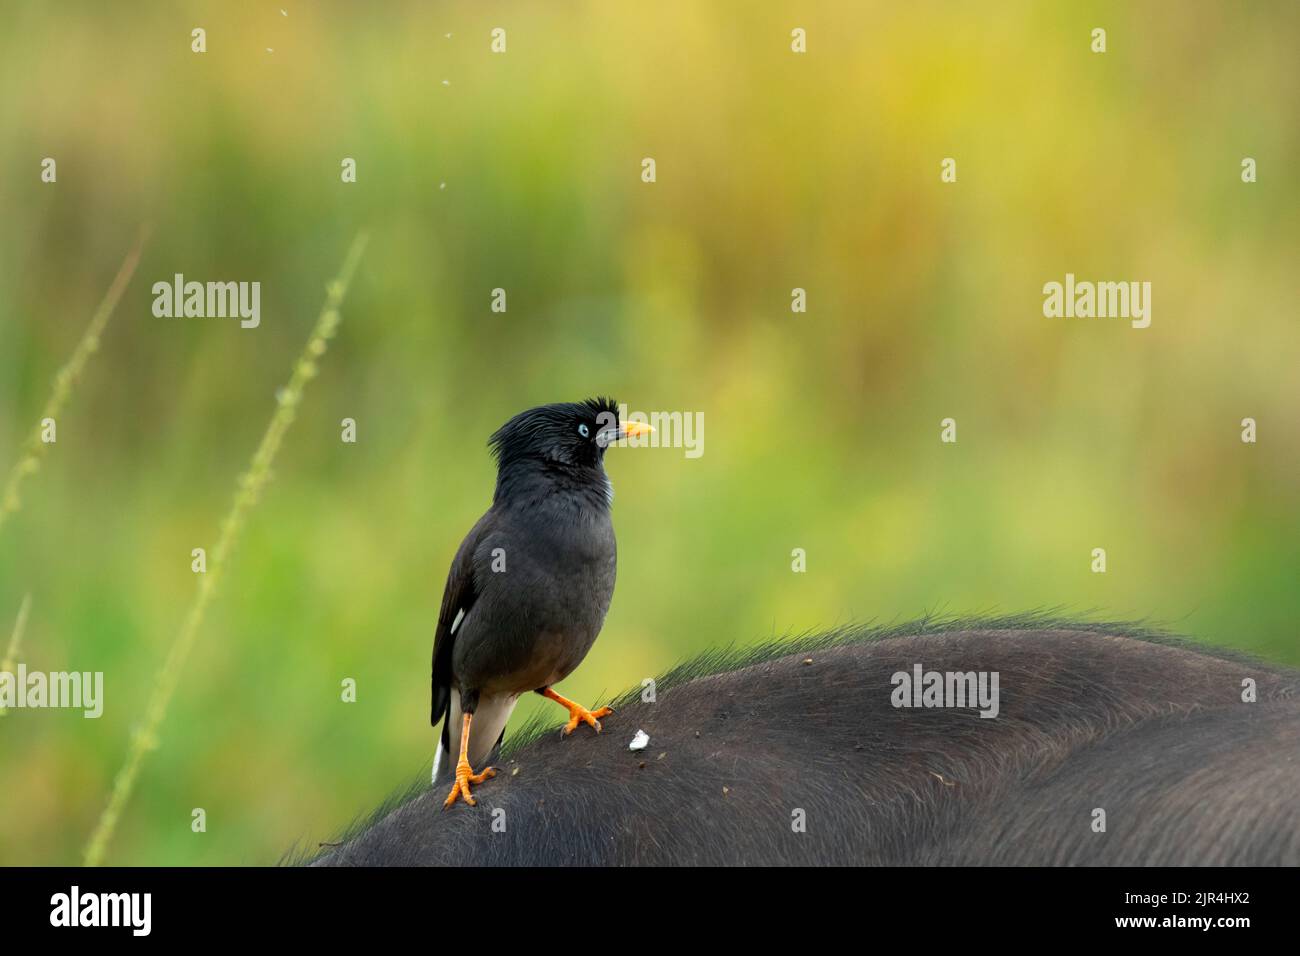 A common myna or Indian myna (Acridotheres tristis) is sitting on a buffalo Stock Photo